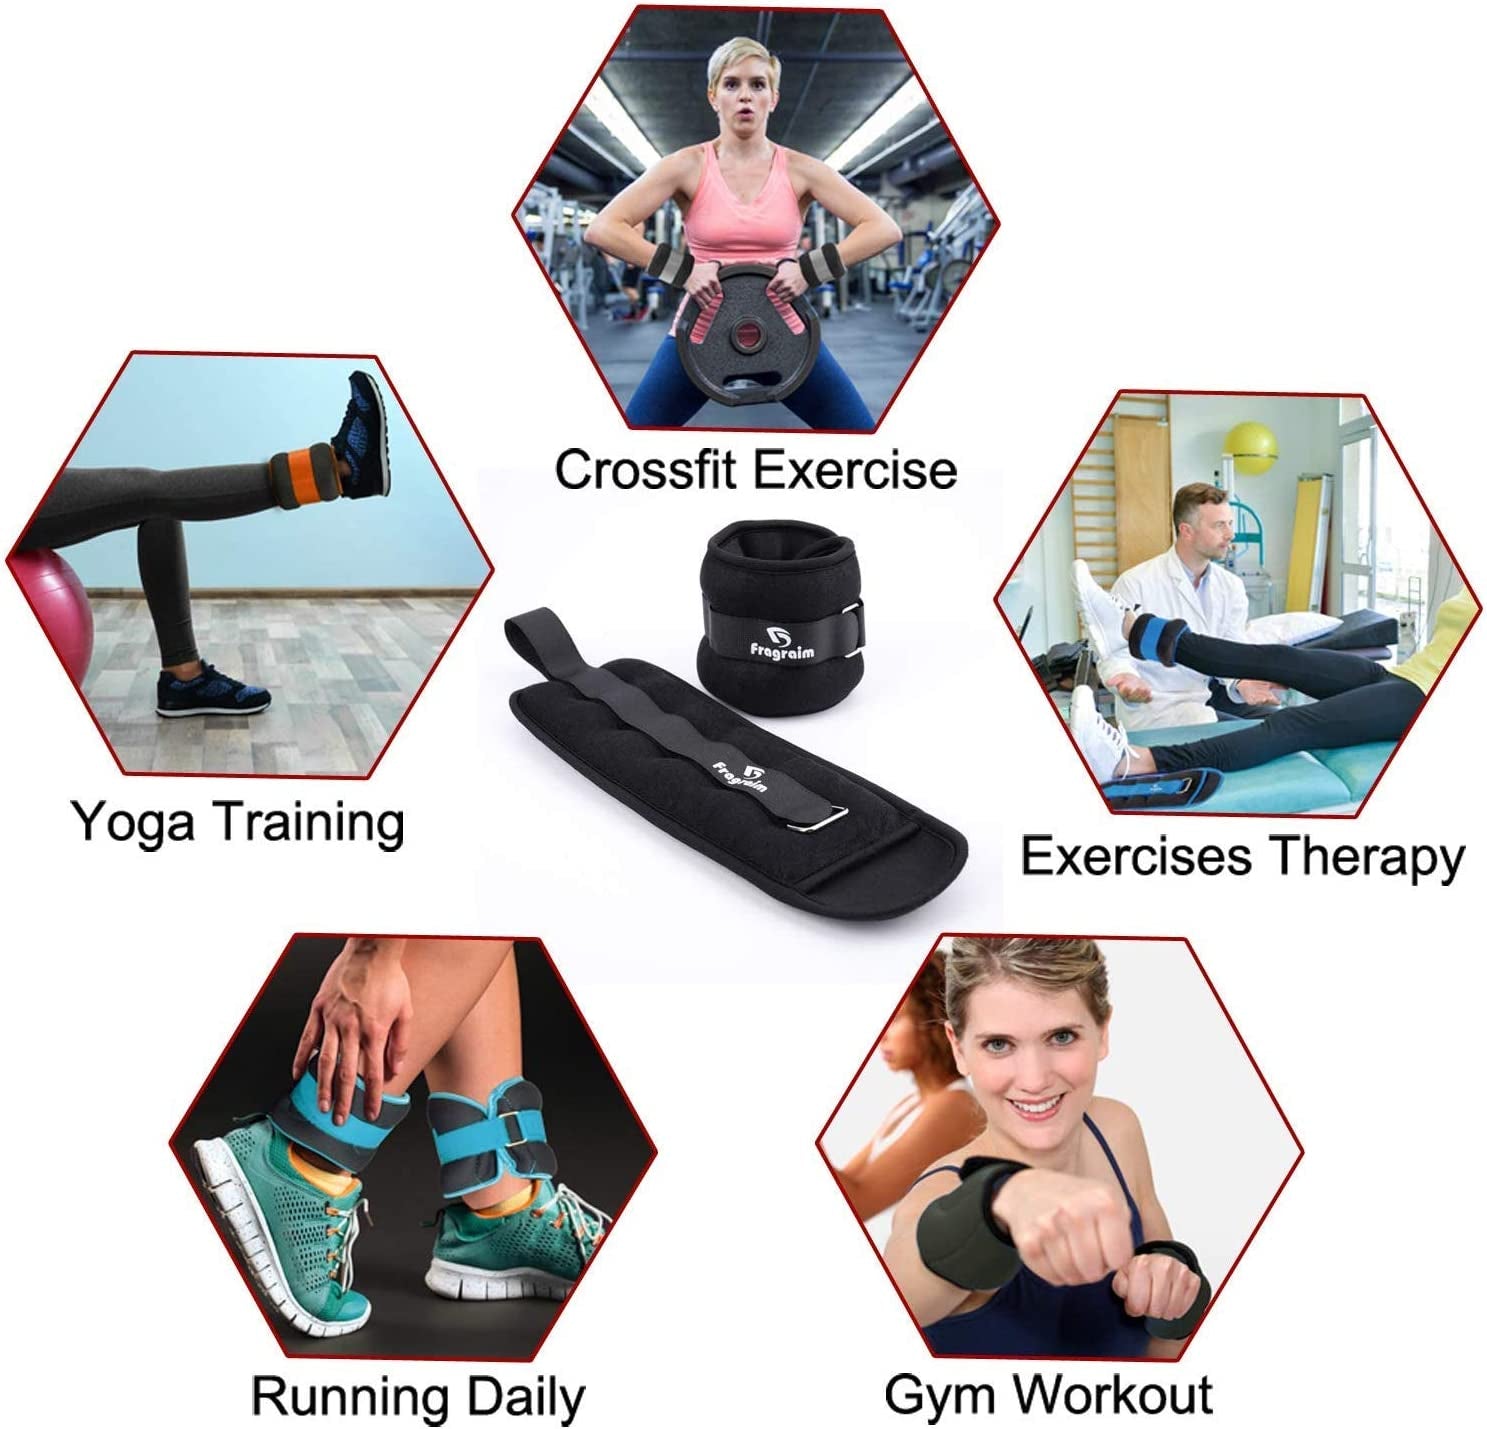 Ankle Weights for Women, Men and Kids - Strength Training Wrist/Leg/Arm Weight Set with Adjustable Strap for Jogging, Gymnastics, Aerobics, Physical Therapy